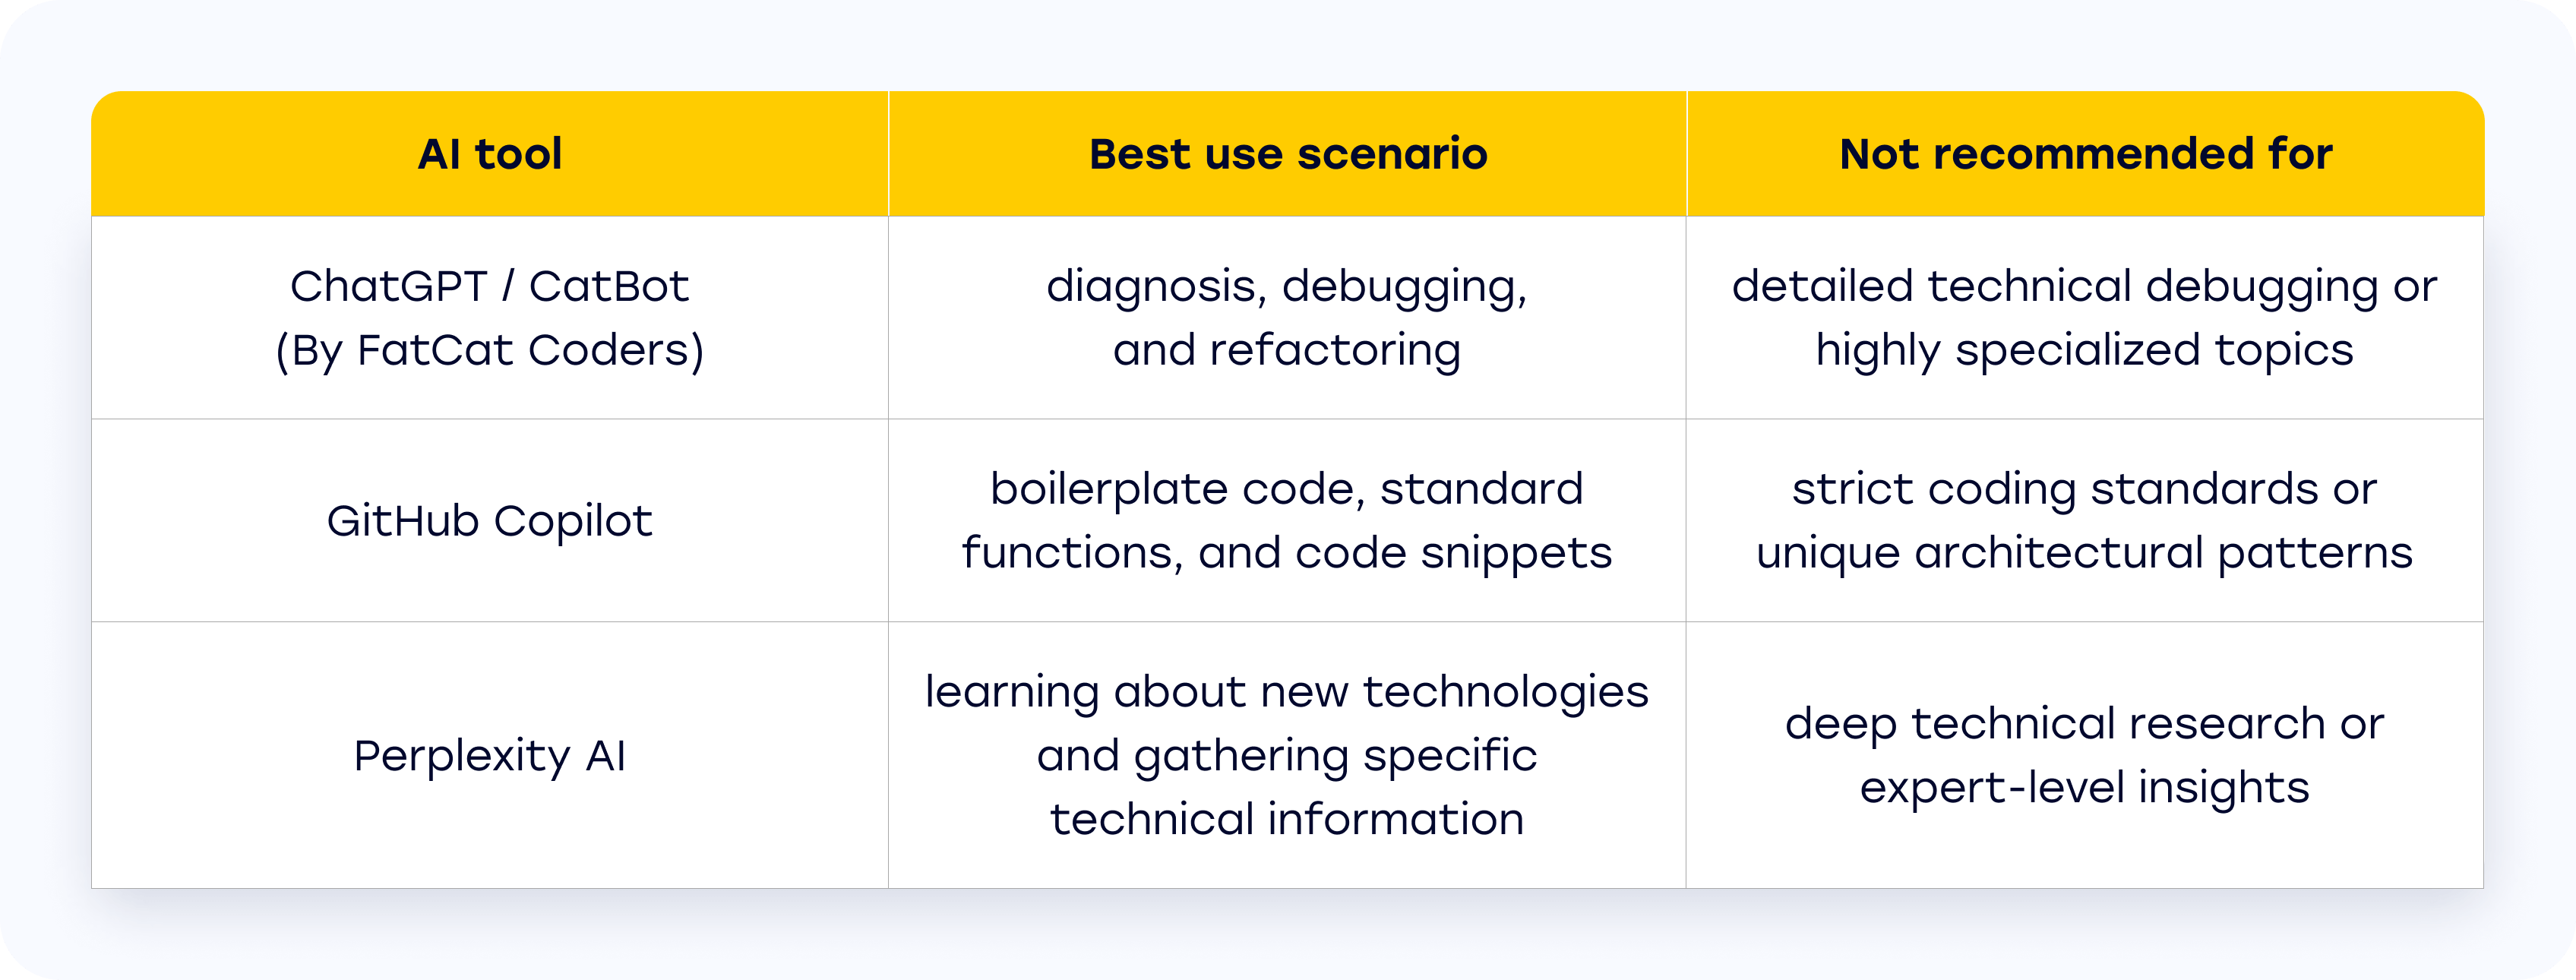 Best and worst use scenarios for each AI tool: chatgpt, copilot, perplexity